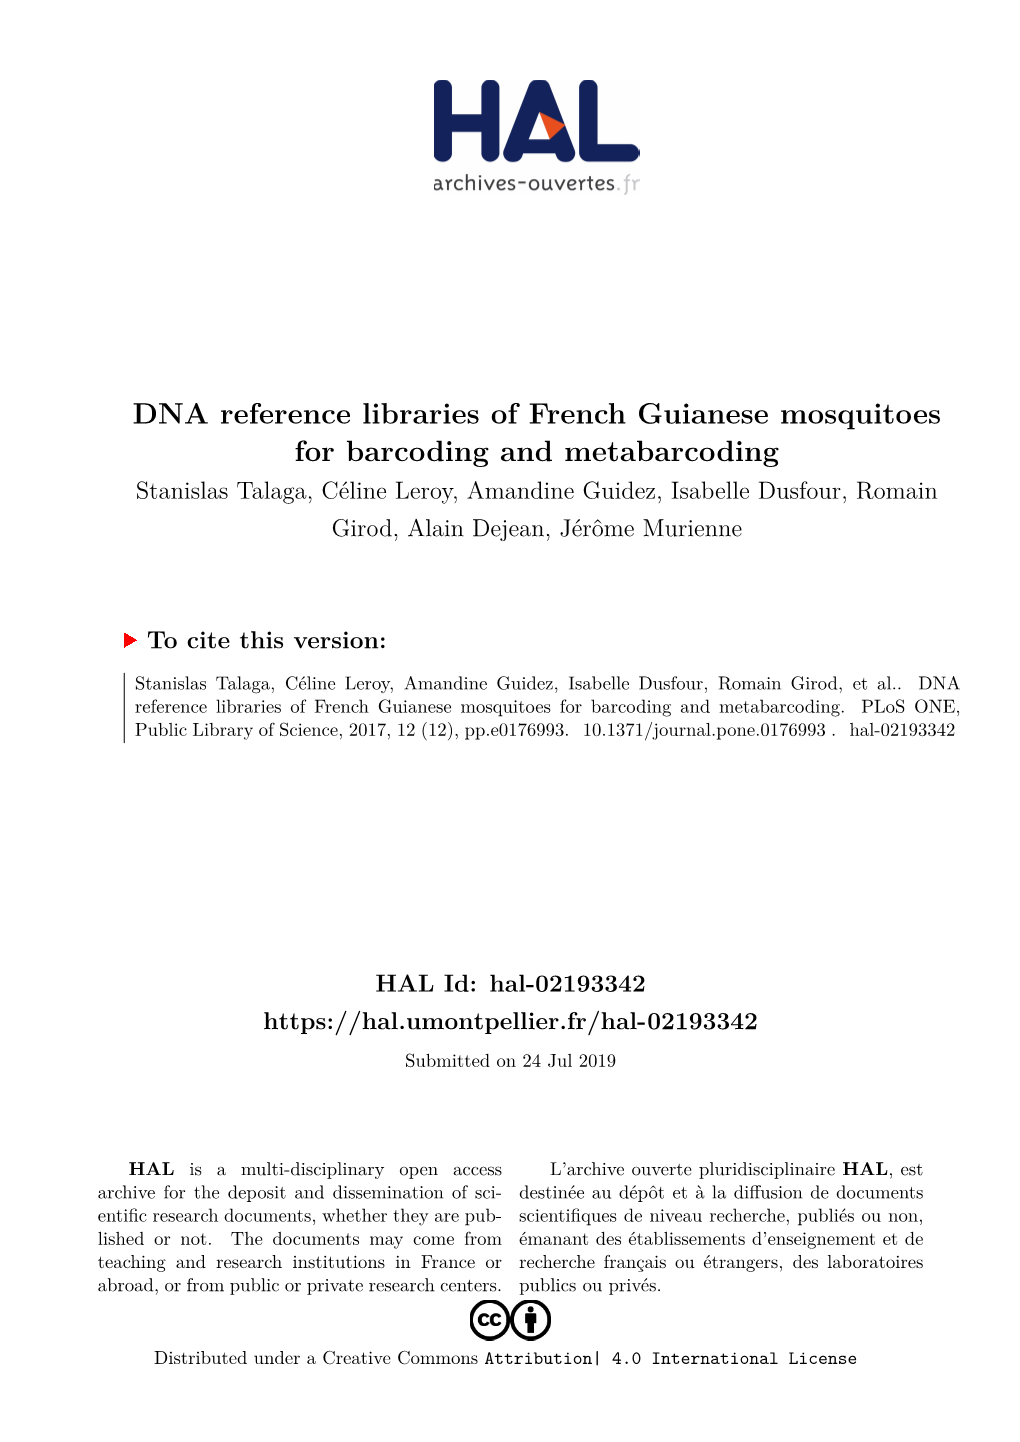 DNA Reference Libraries of French Guianese Mosquitoes For